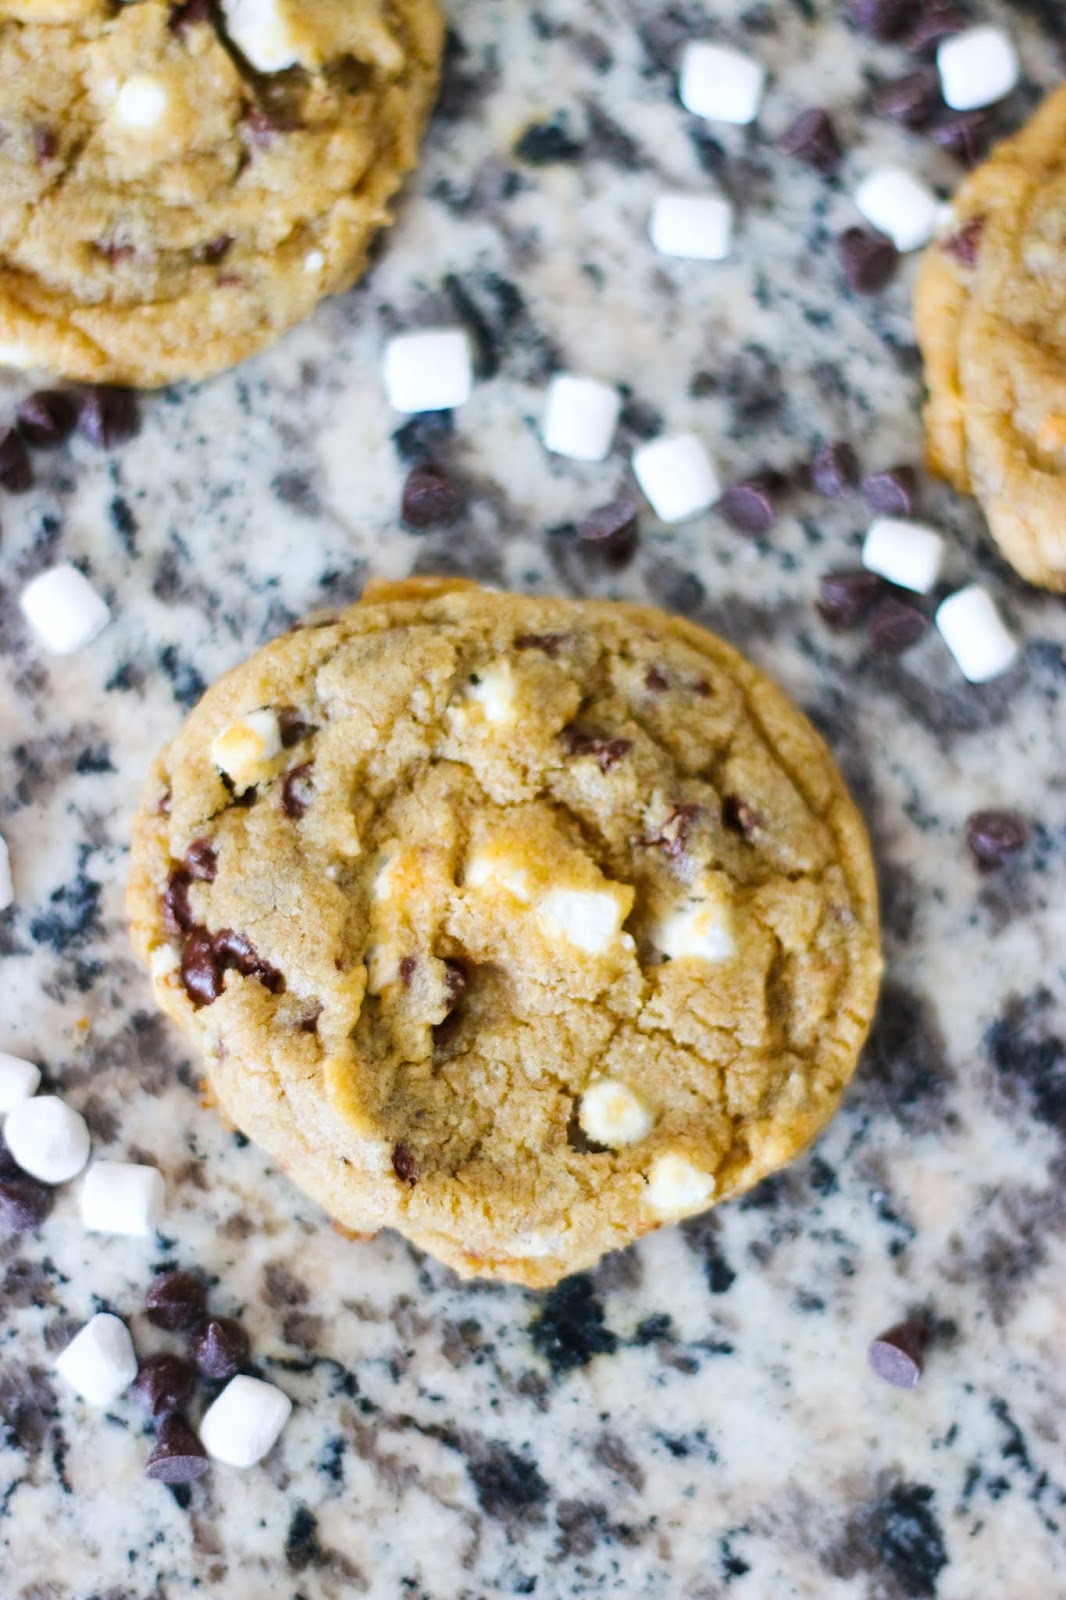 Chocolate Chip S'mores Cookies